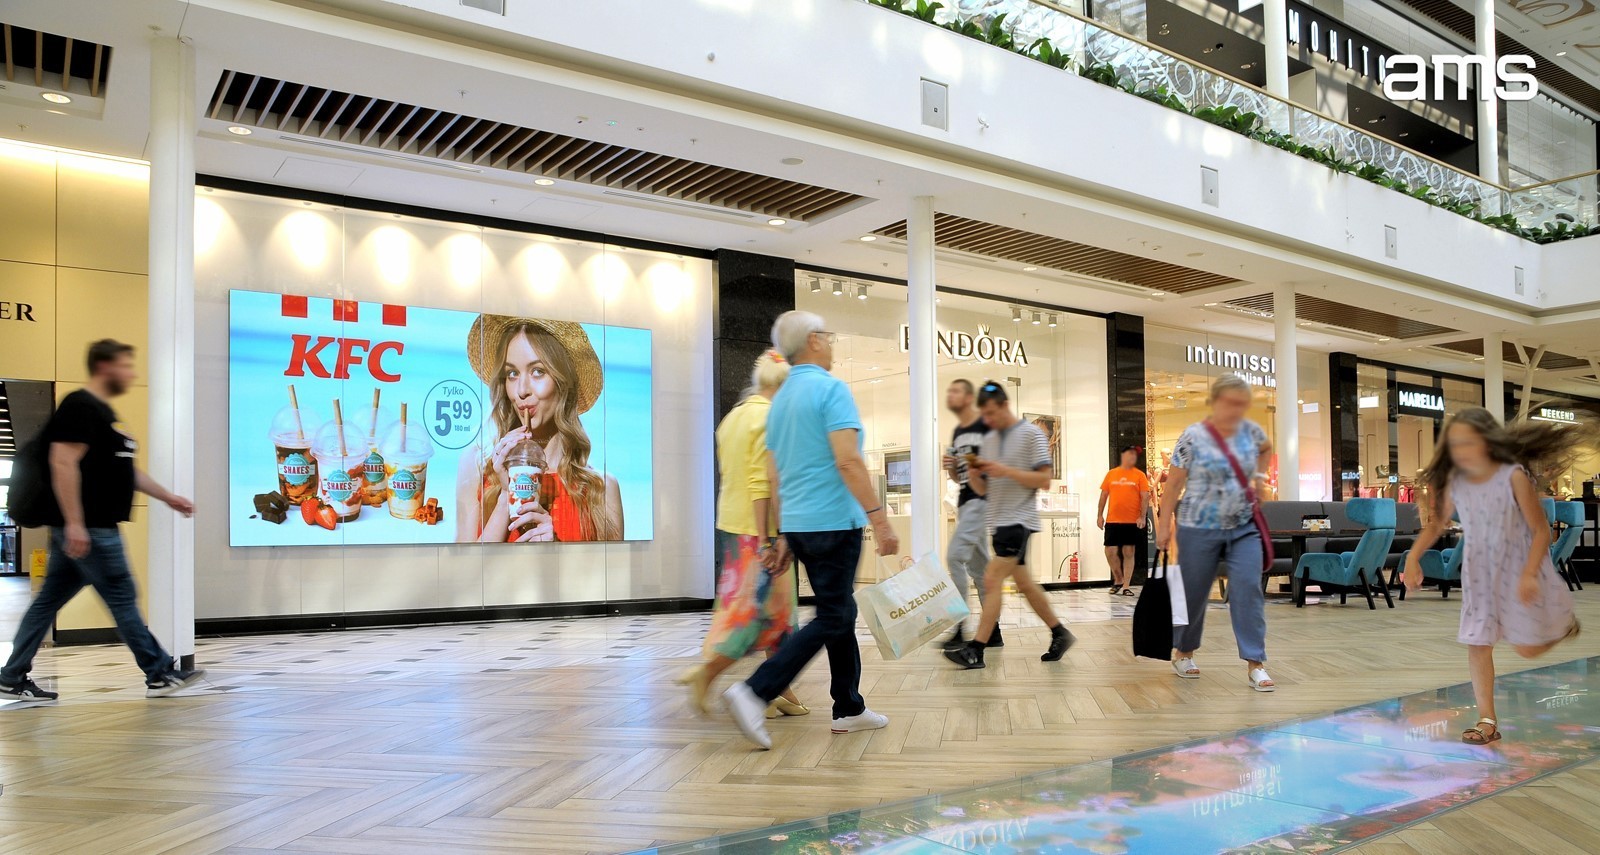 KFC chooses the Digital Indoor AMS network in 22 shopping malls and 18 cities and the finished product targeted in the classic OOH